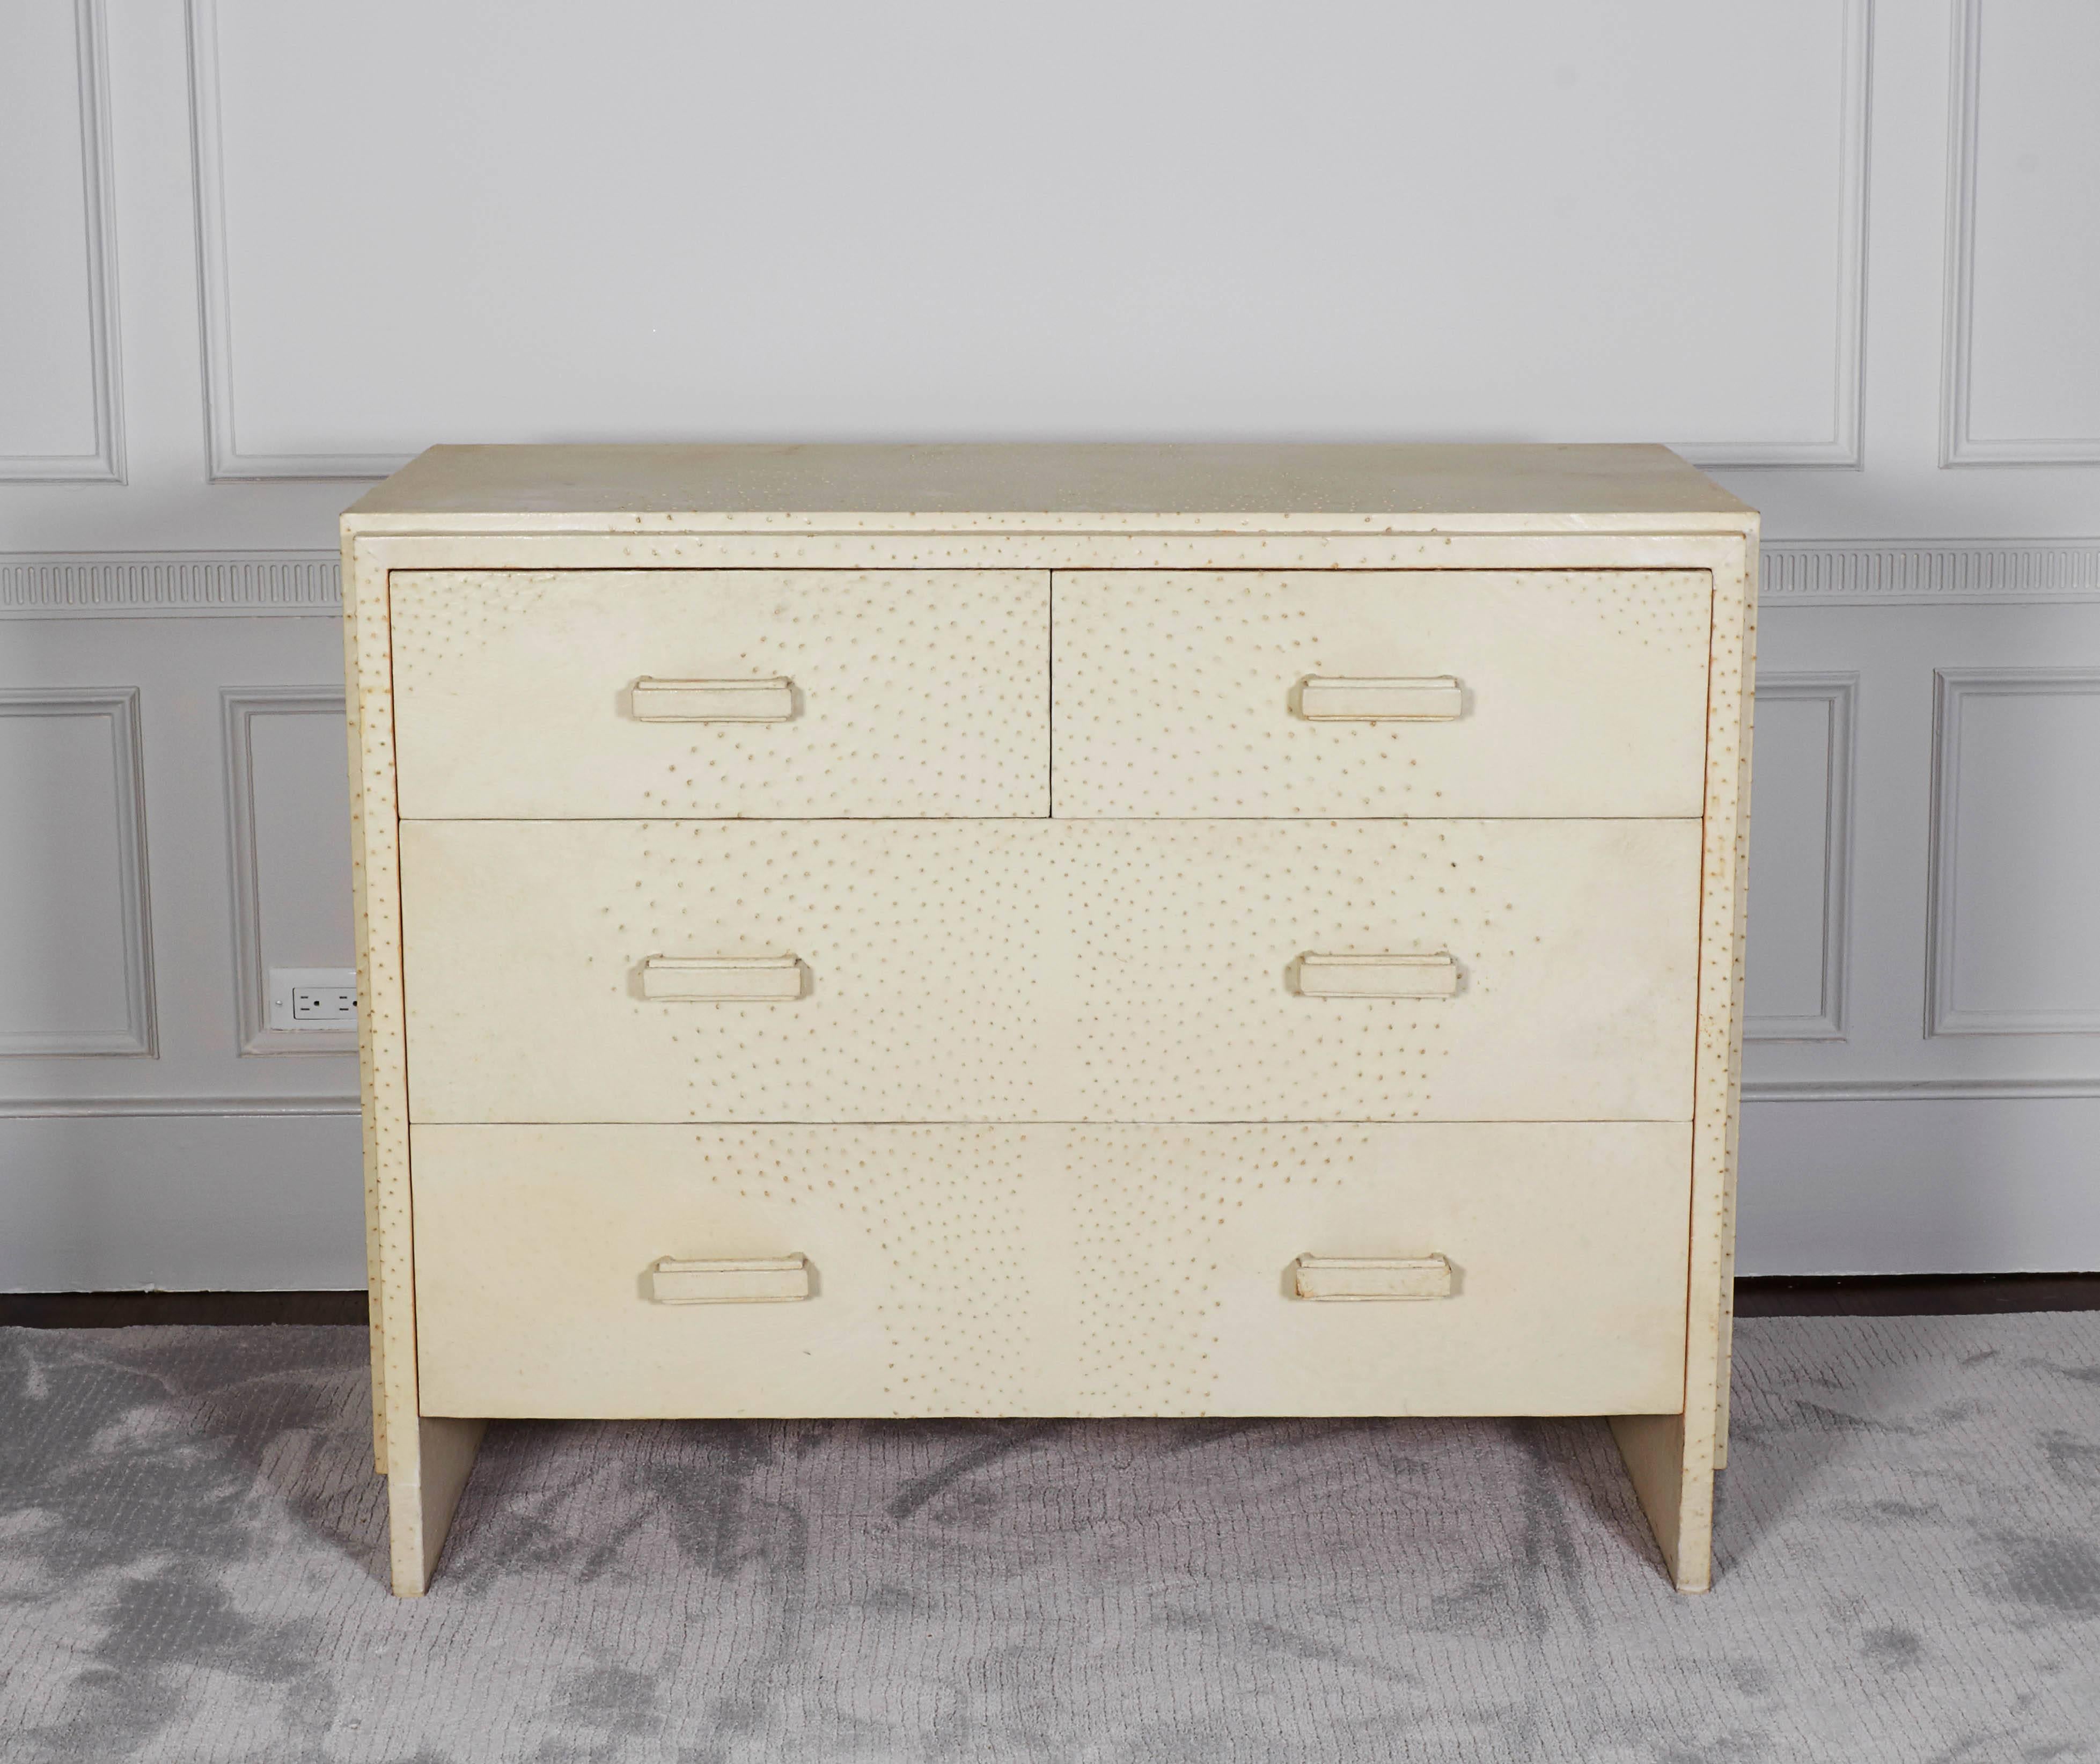 Elegant custom dresser made of cream colored ostrich skin. This unique piece was produced by R&Y Augousti with authentic ostrich skins.